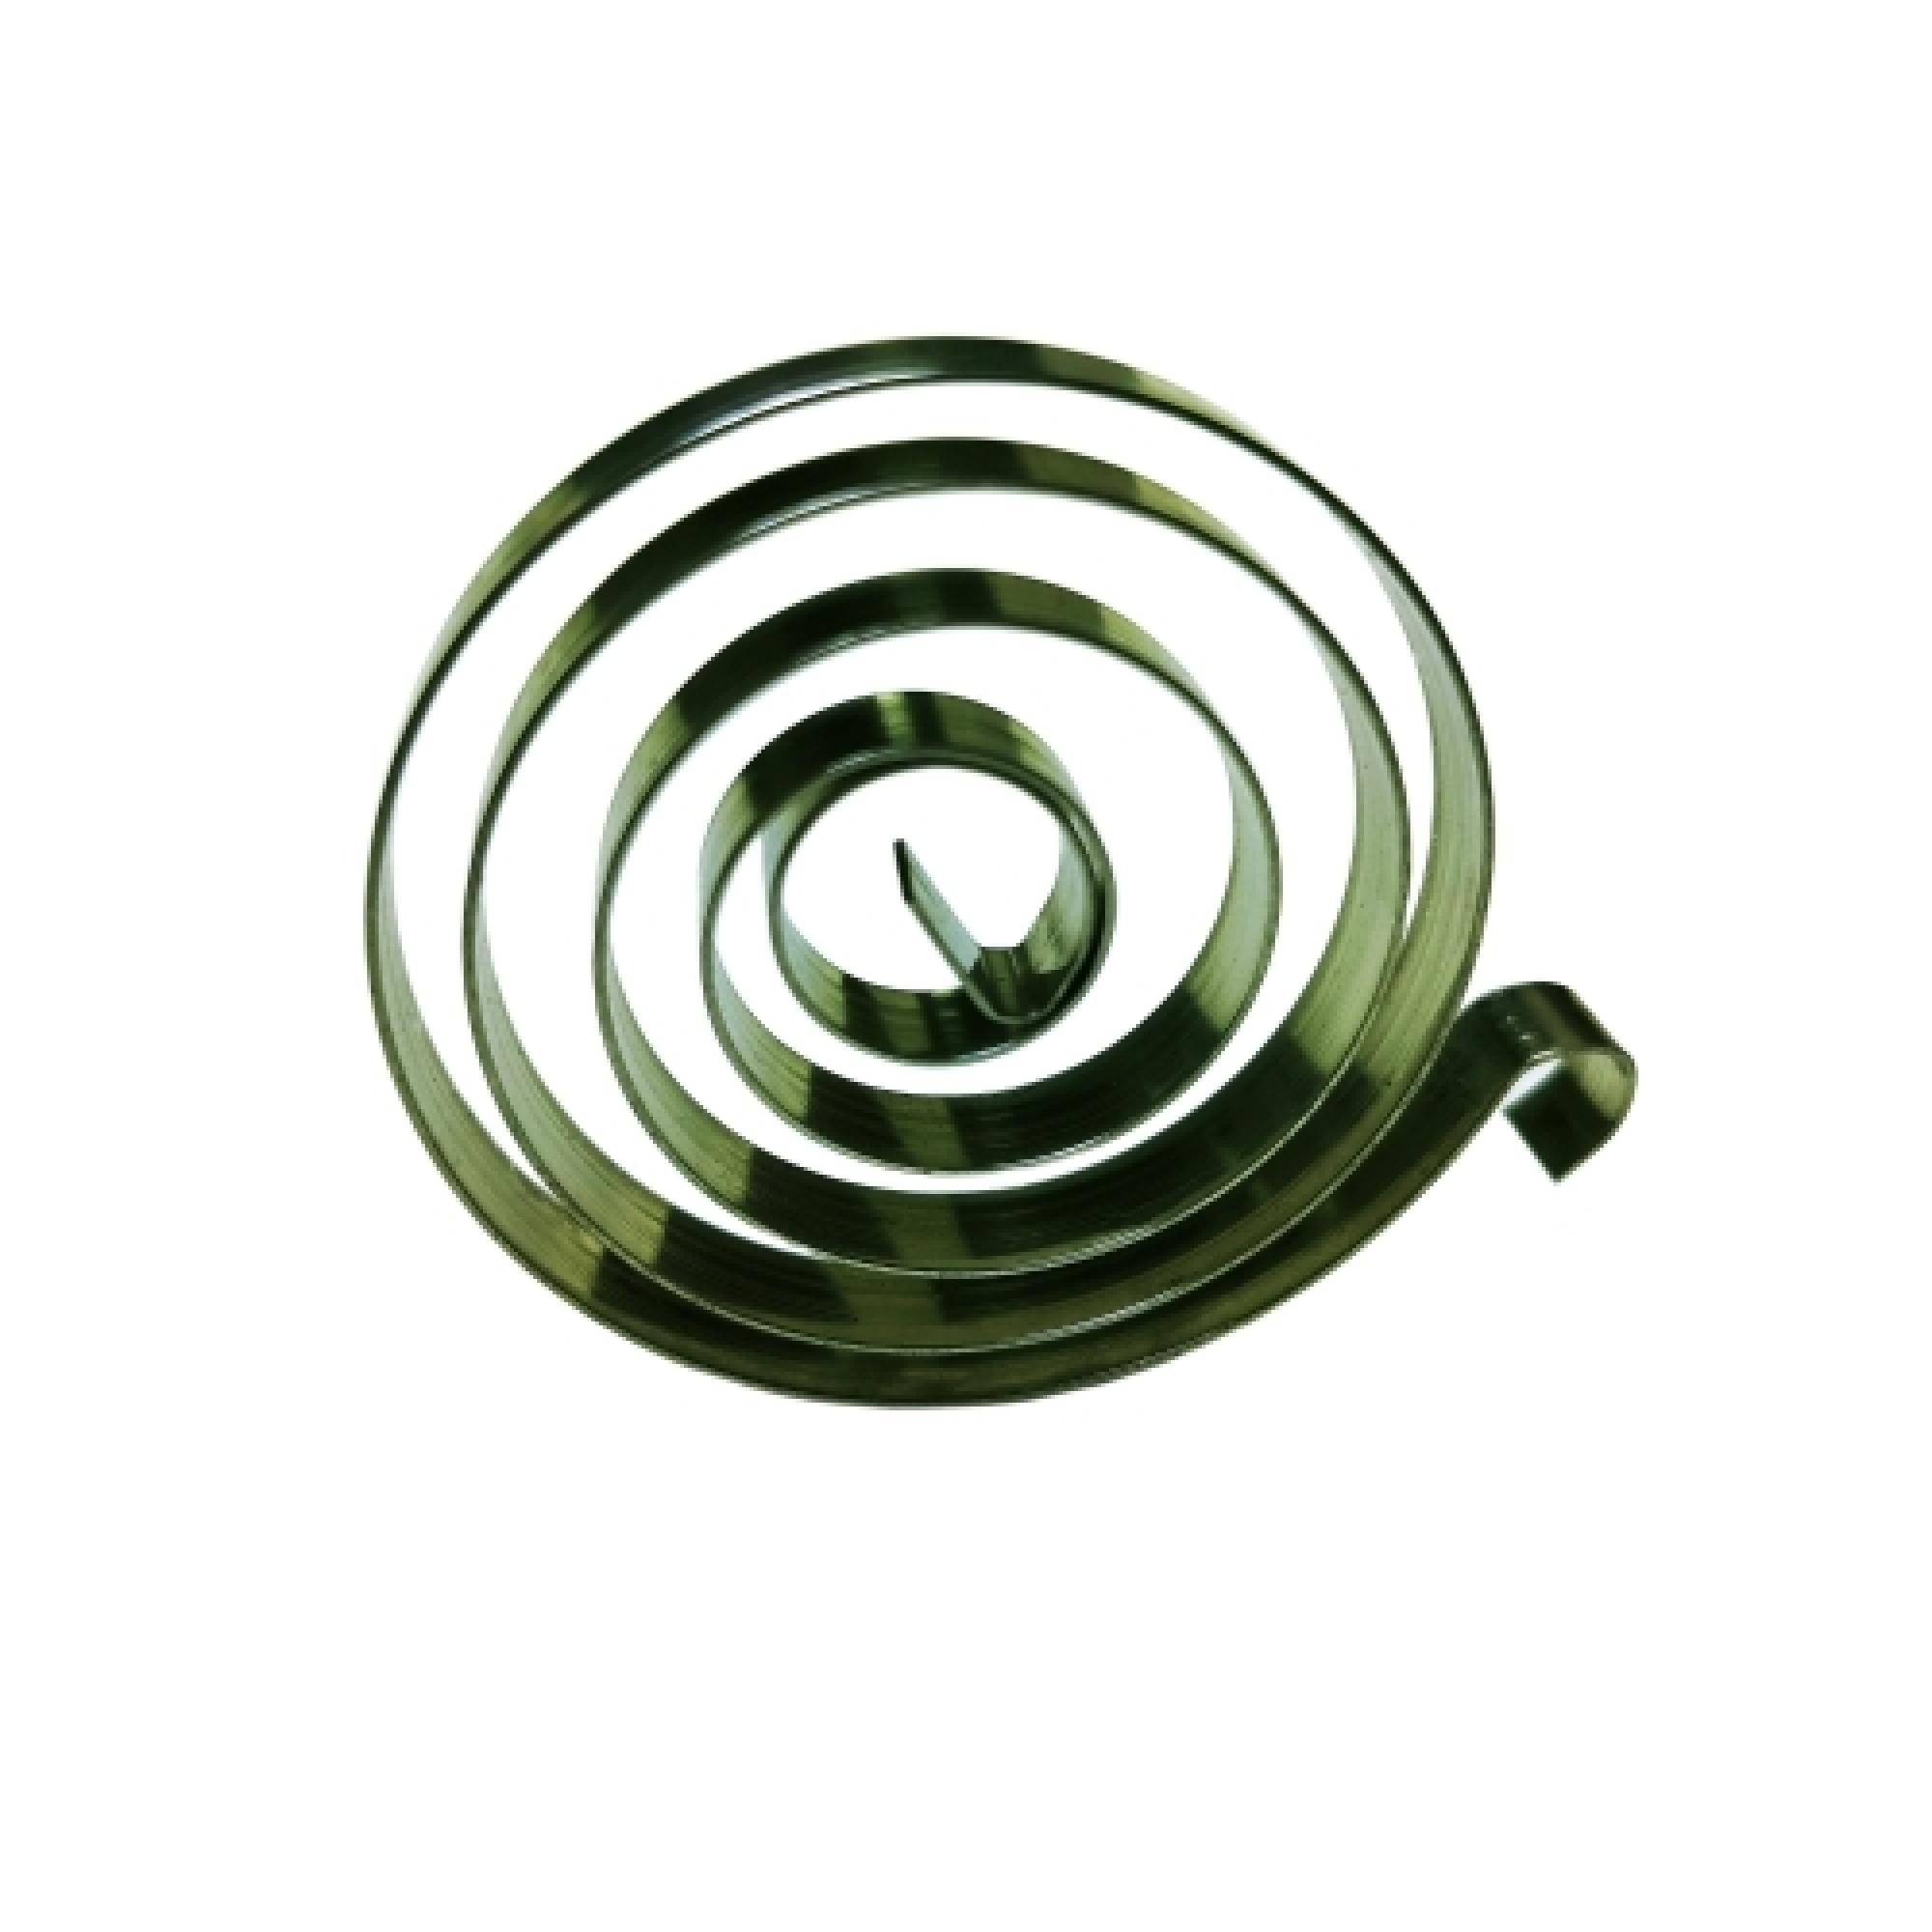 Stainless Steel Flat Coil Spiral Spring